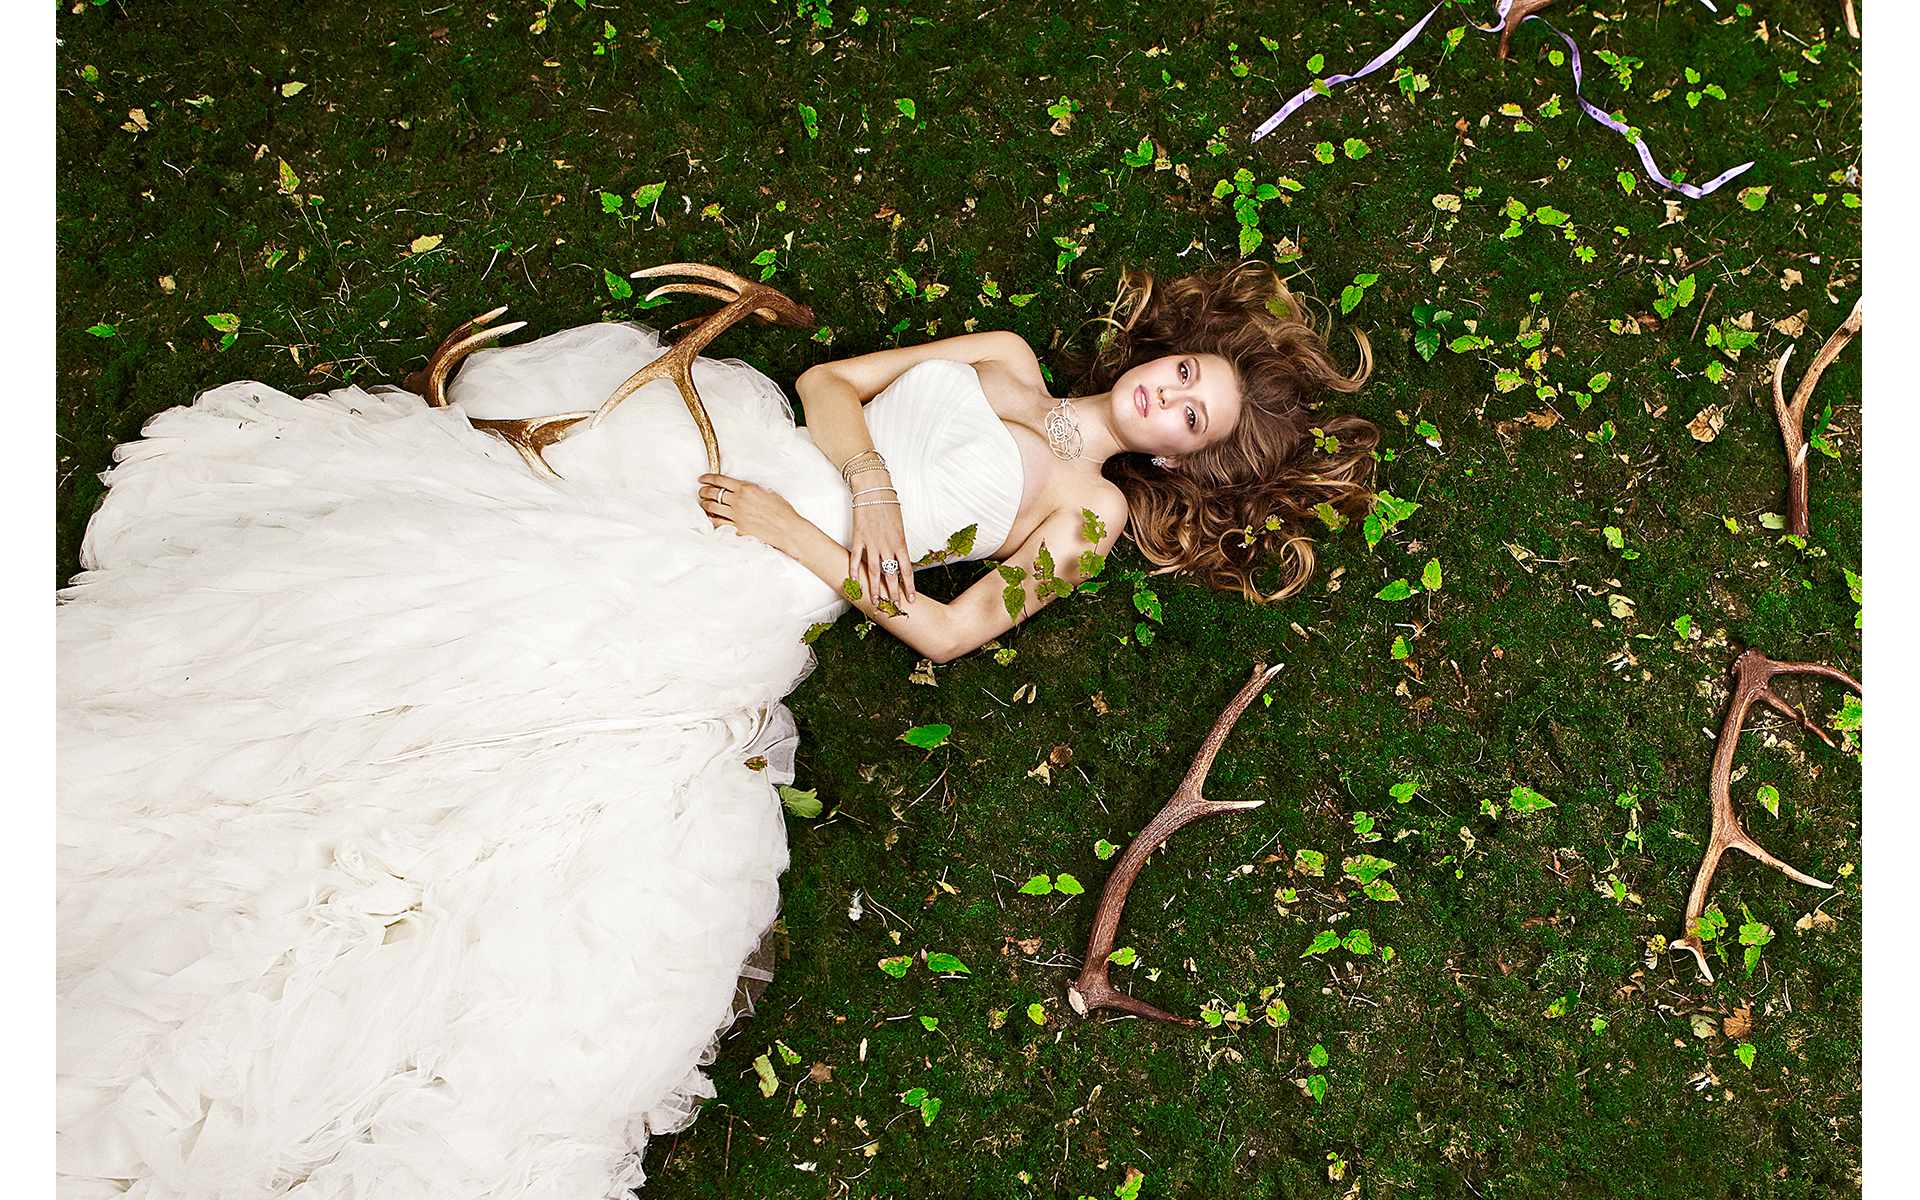 Model laying down in green moss in a white dress holding antlers wearing jewellery in a jewellery advertising photo shoot for winsor bishiop shot in Narford Norfolk